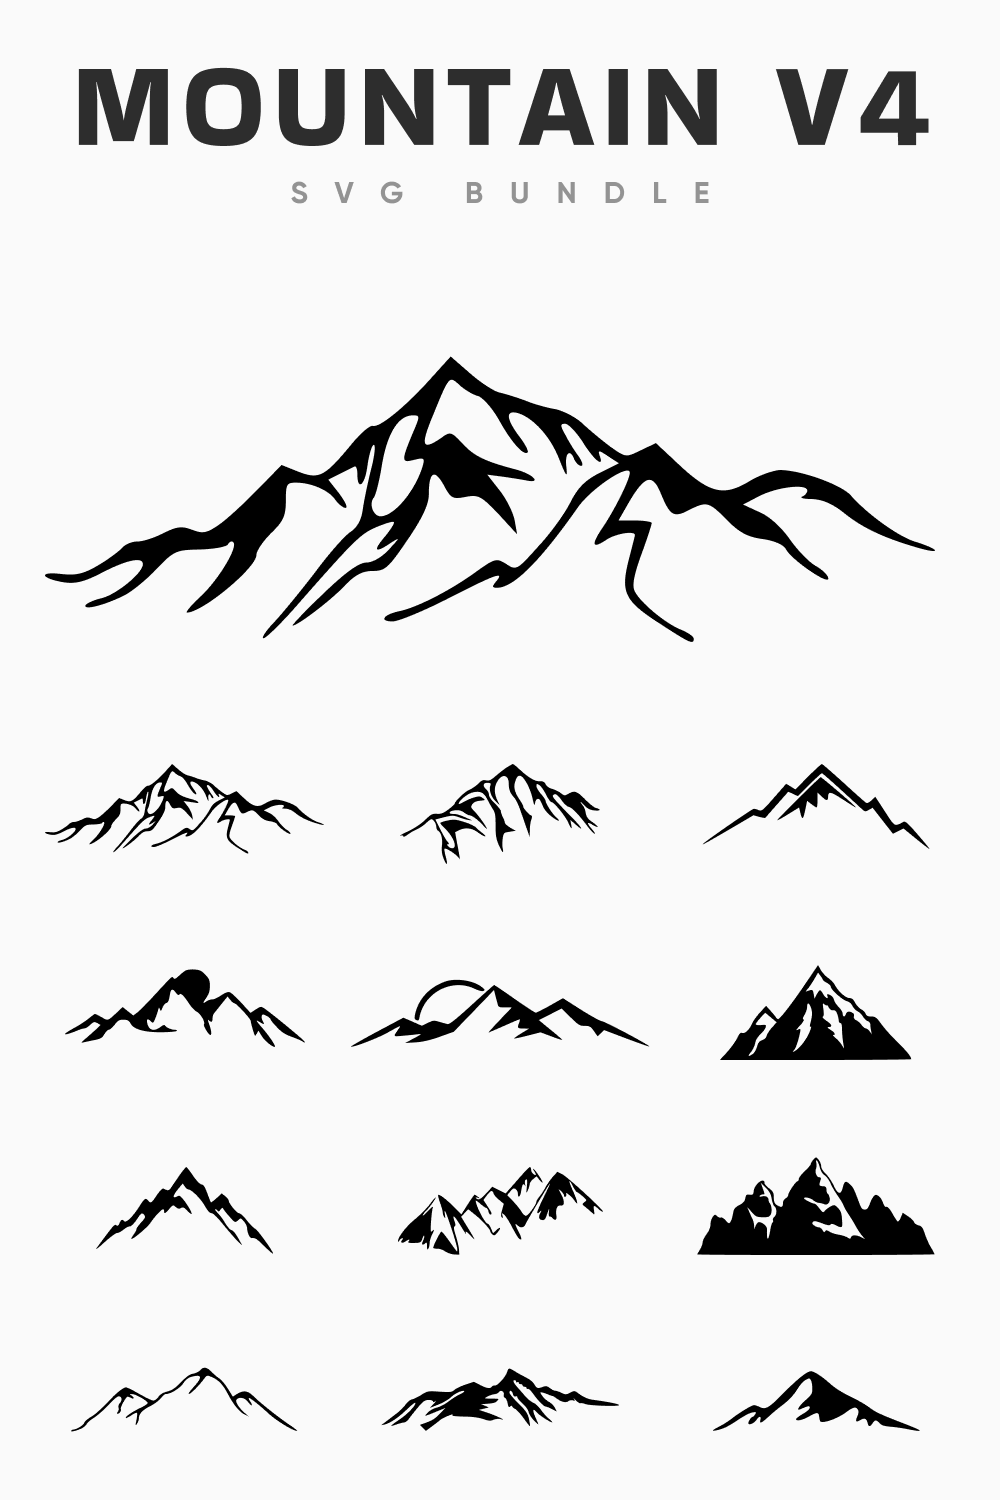 Different mountains with different layout and shape.